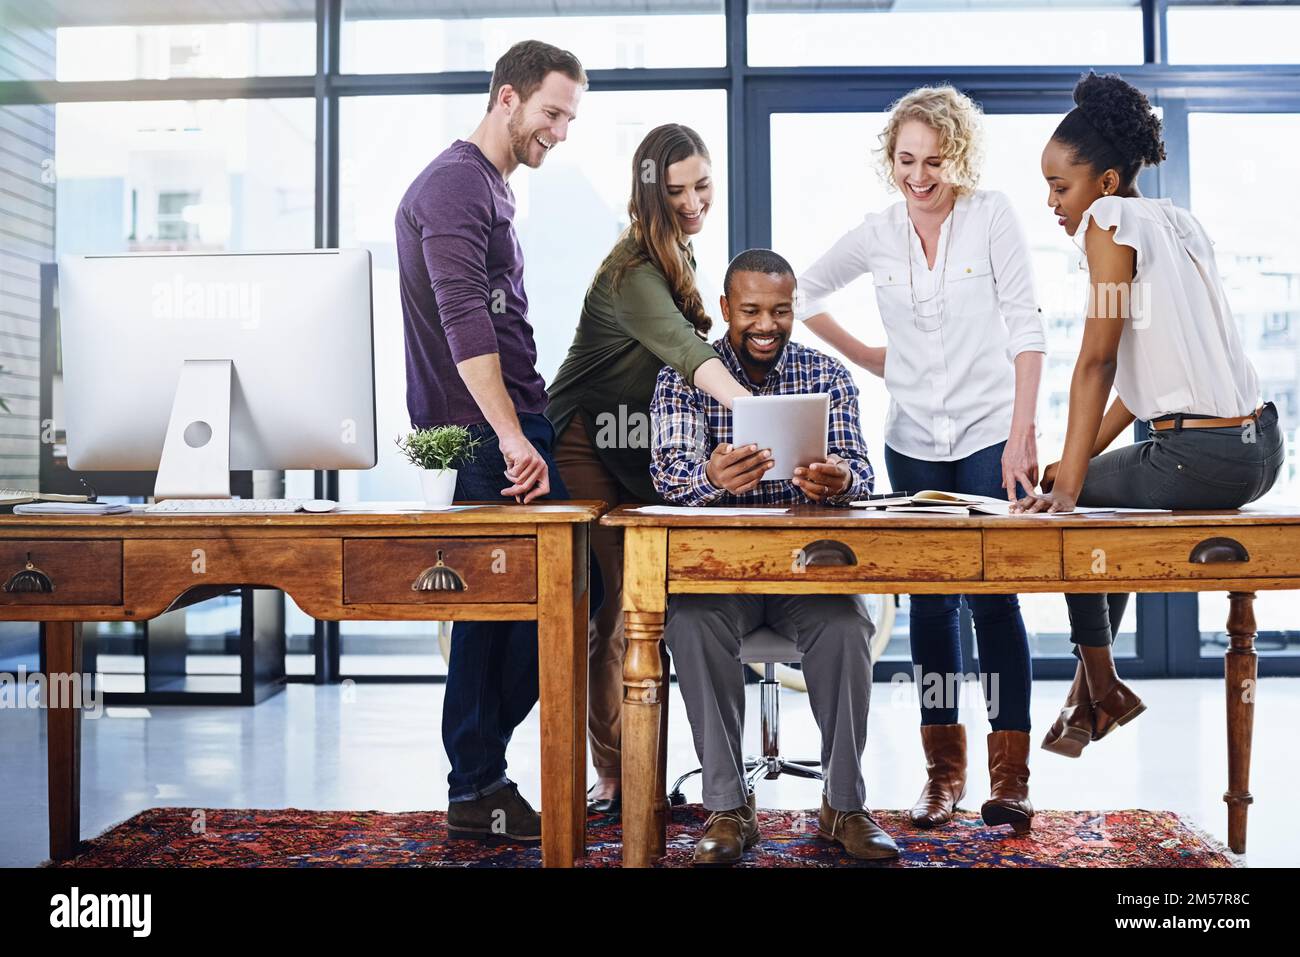 Doing great work together. a team of designers working together in the office. Stock Photo